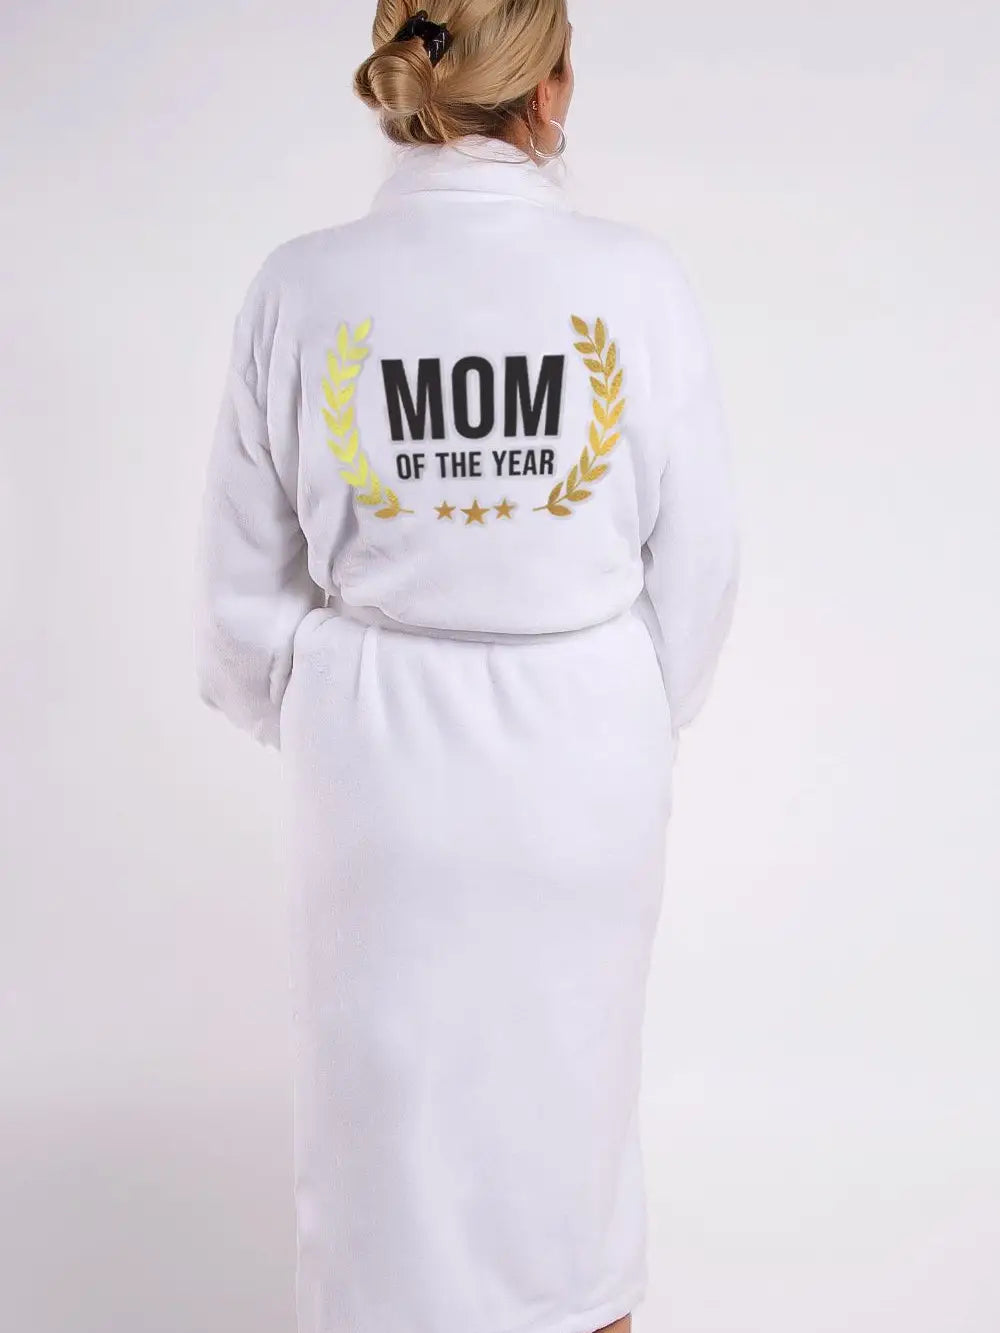 Mom of the year robe